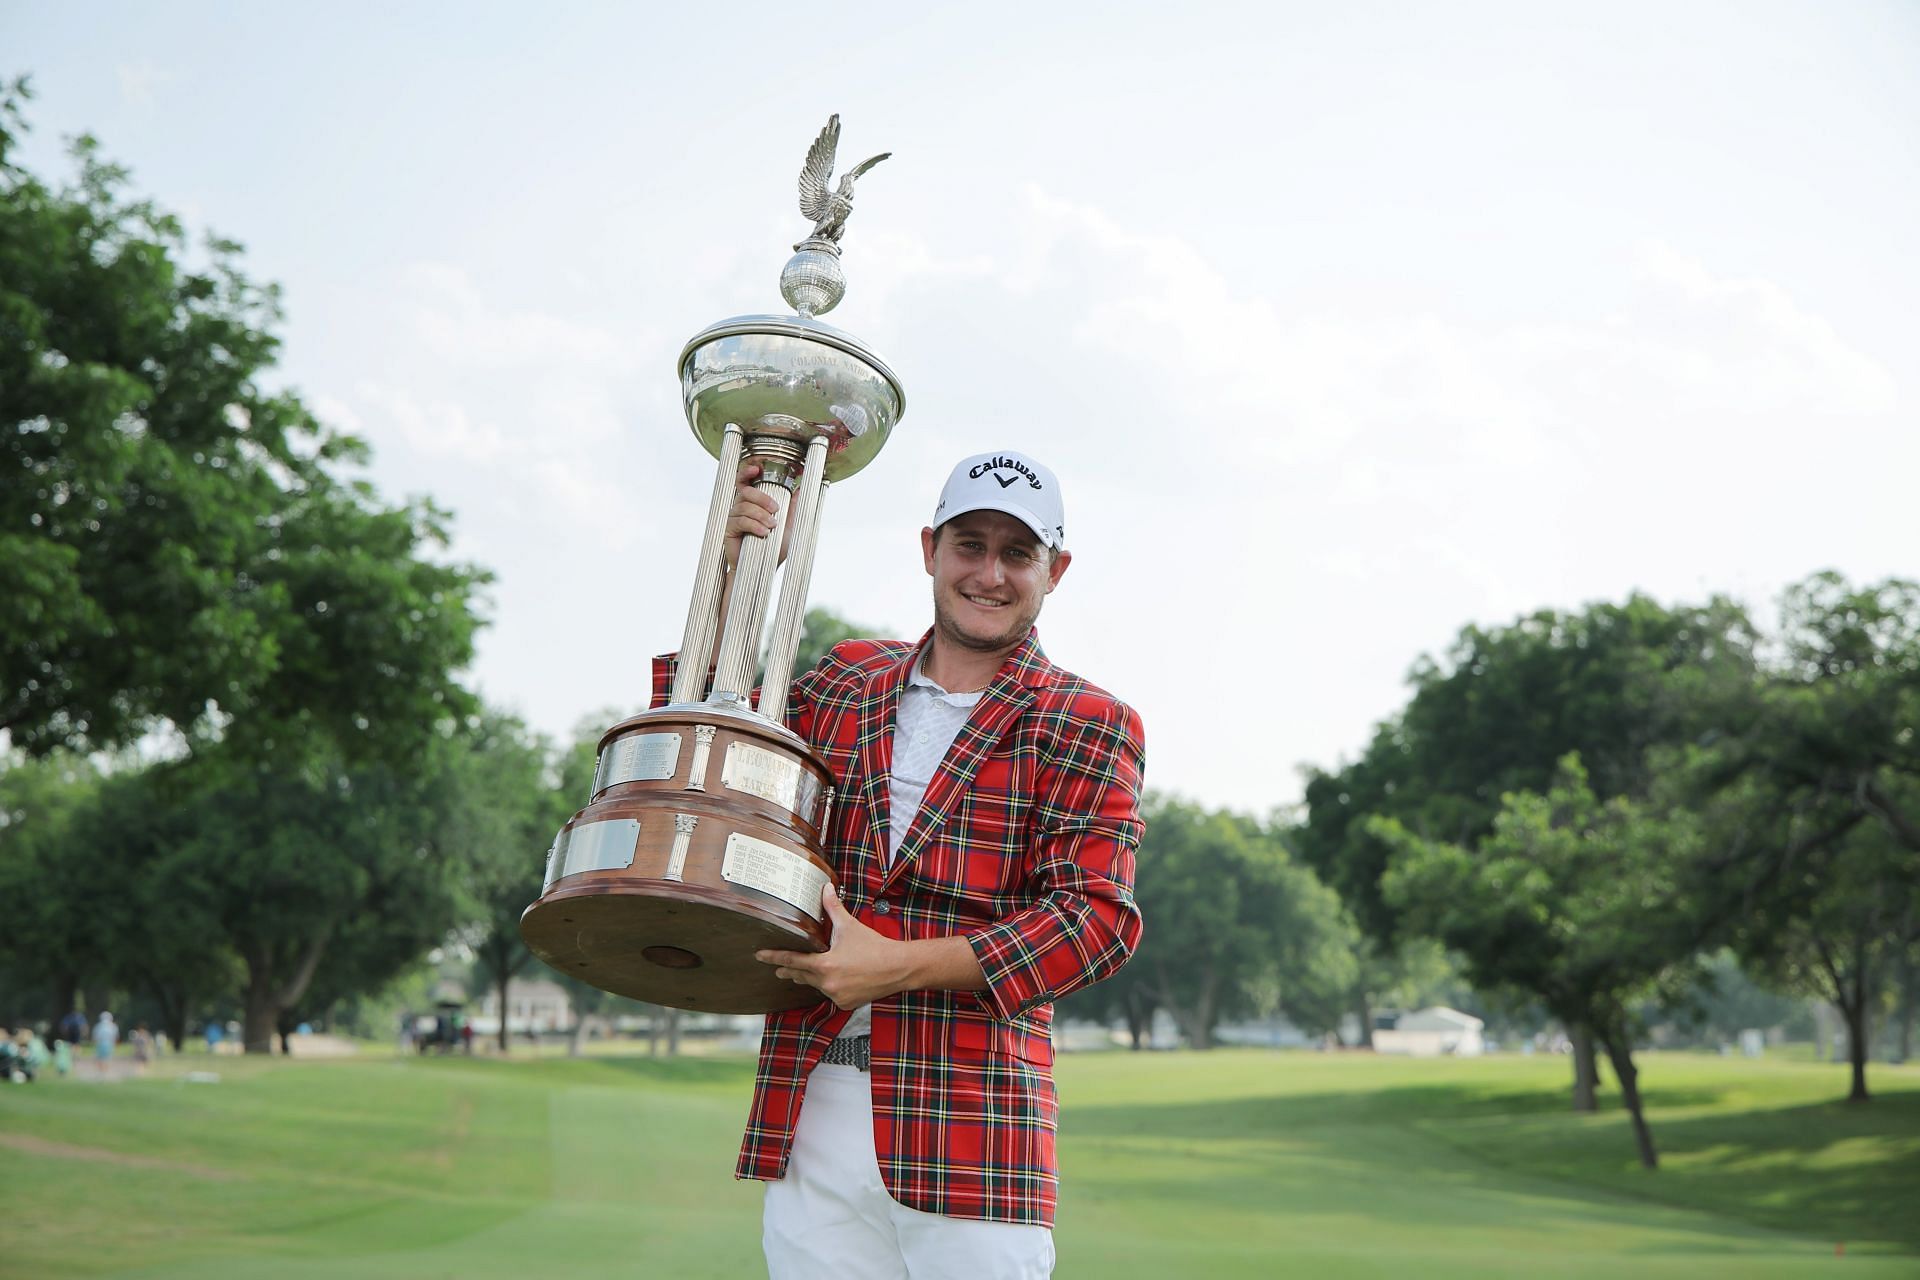 Emiliano Grillo of Argentina poses with the trophy after winning the Charles Schwab Challenge (Image via Getty)